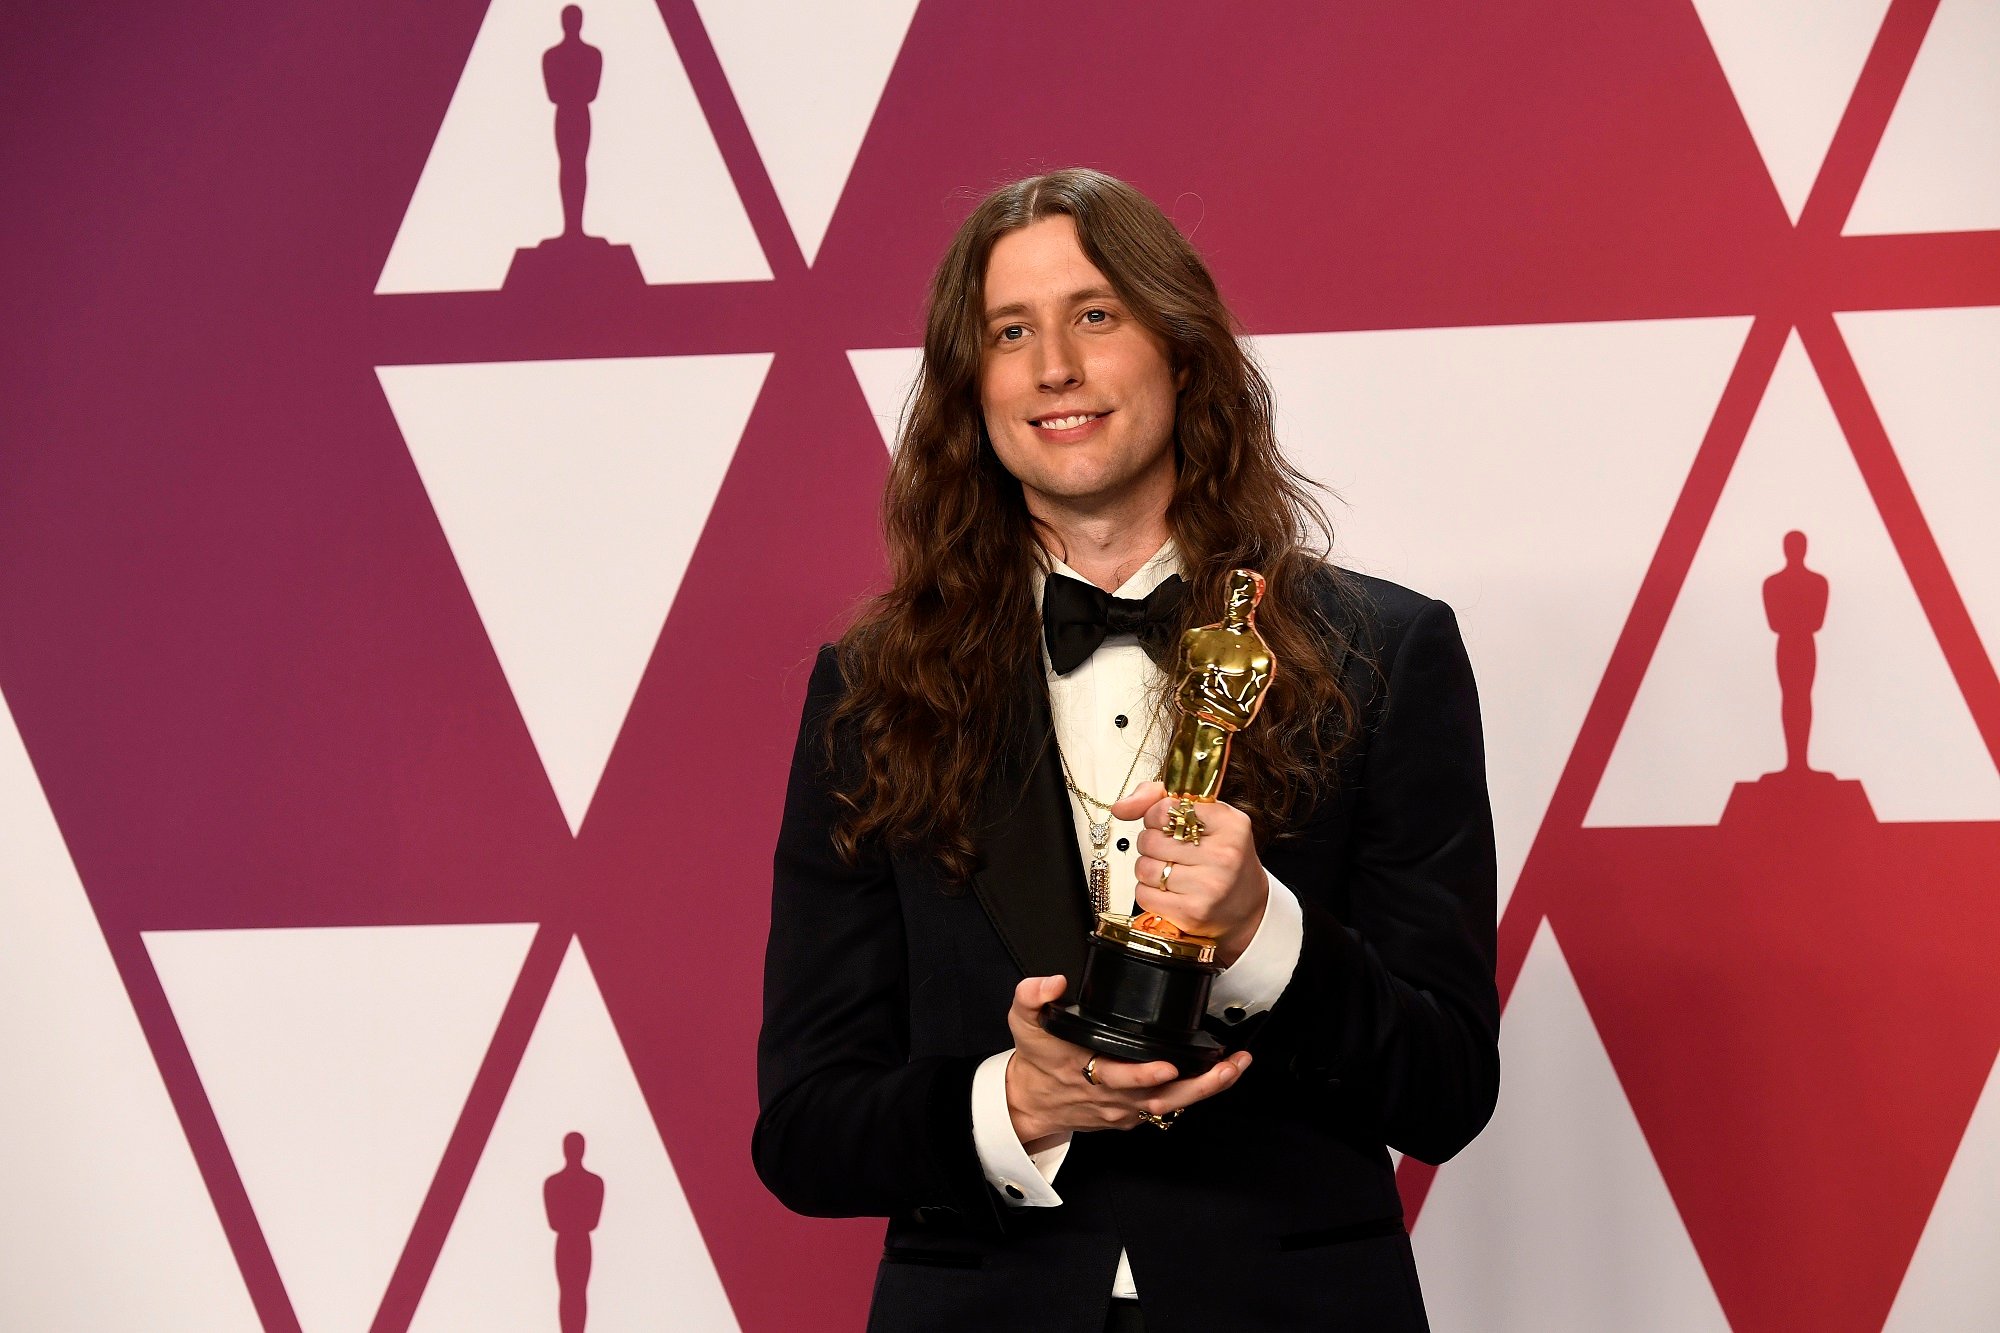 Composer Ludwig Göransson holds an Oscar statue in the Academy Awards press room